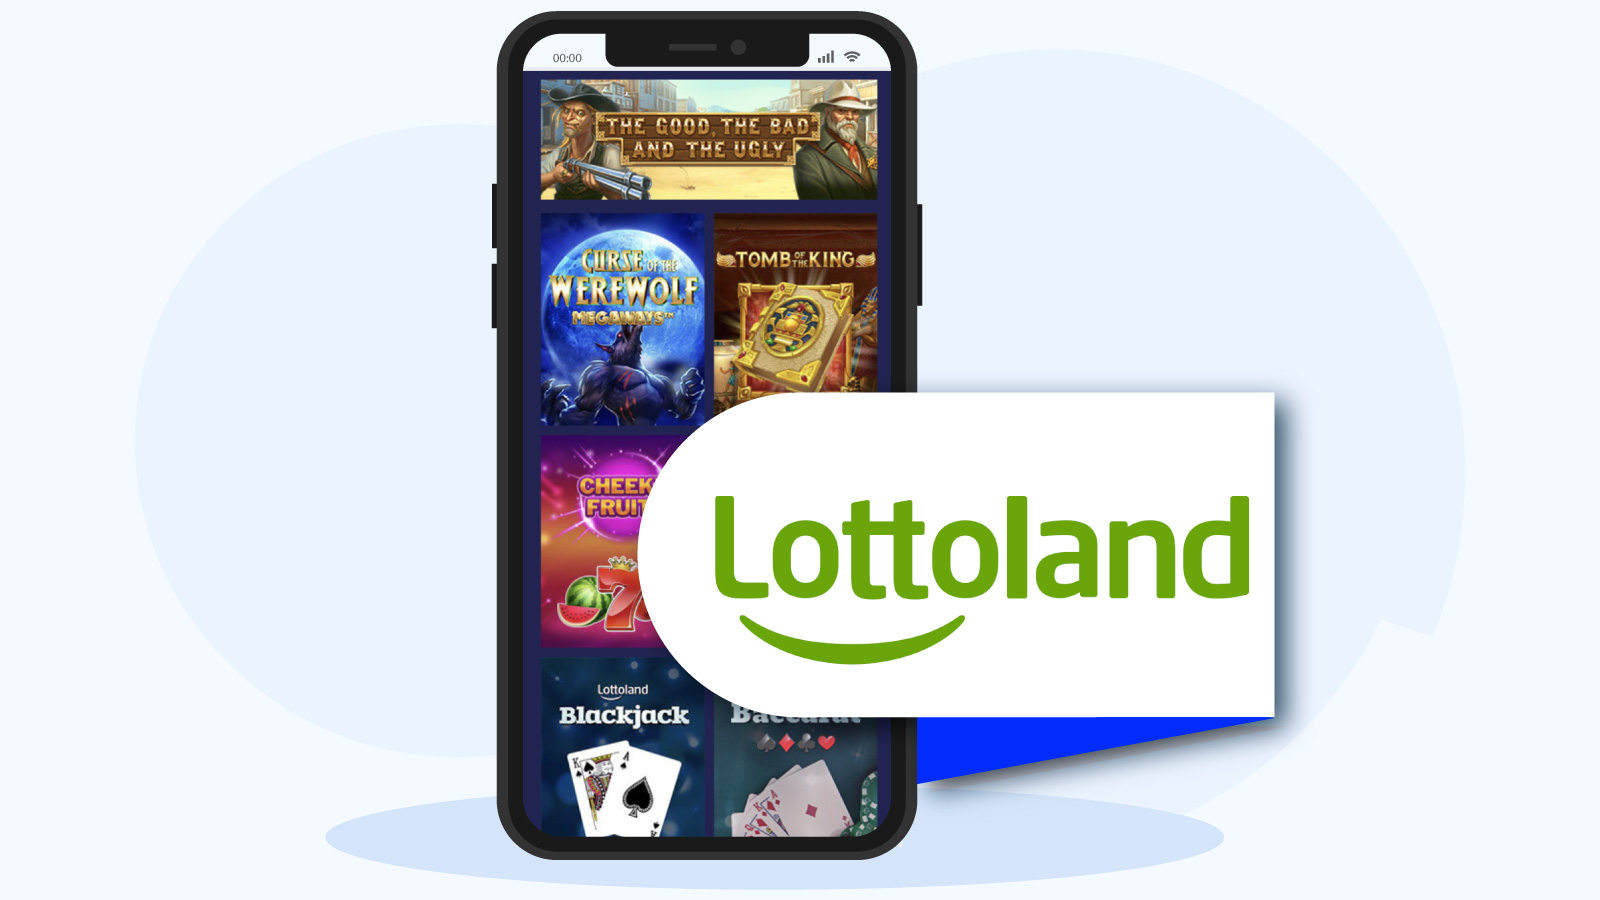 Lottoland Casino – Best Android Casino Slot Selection